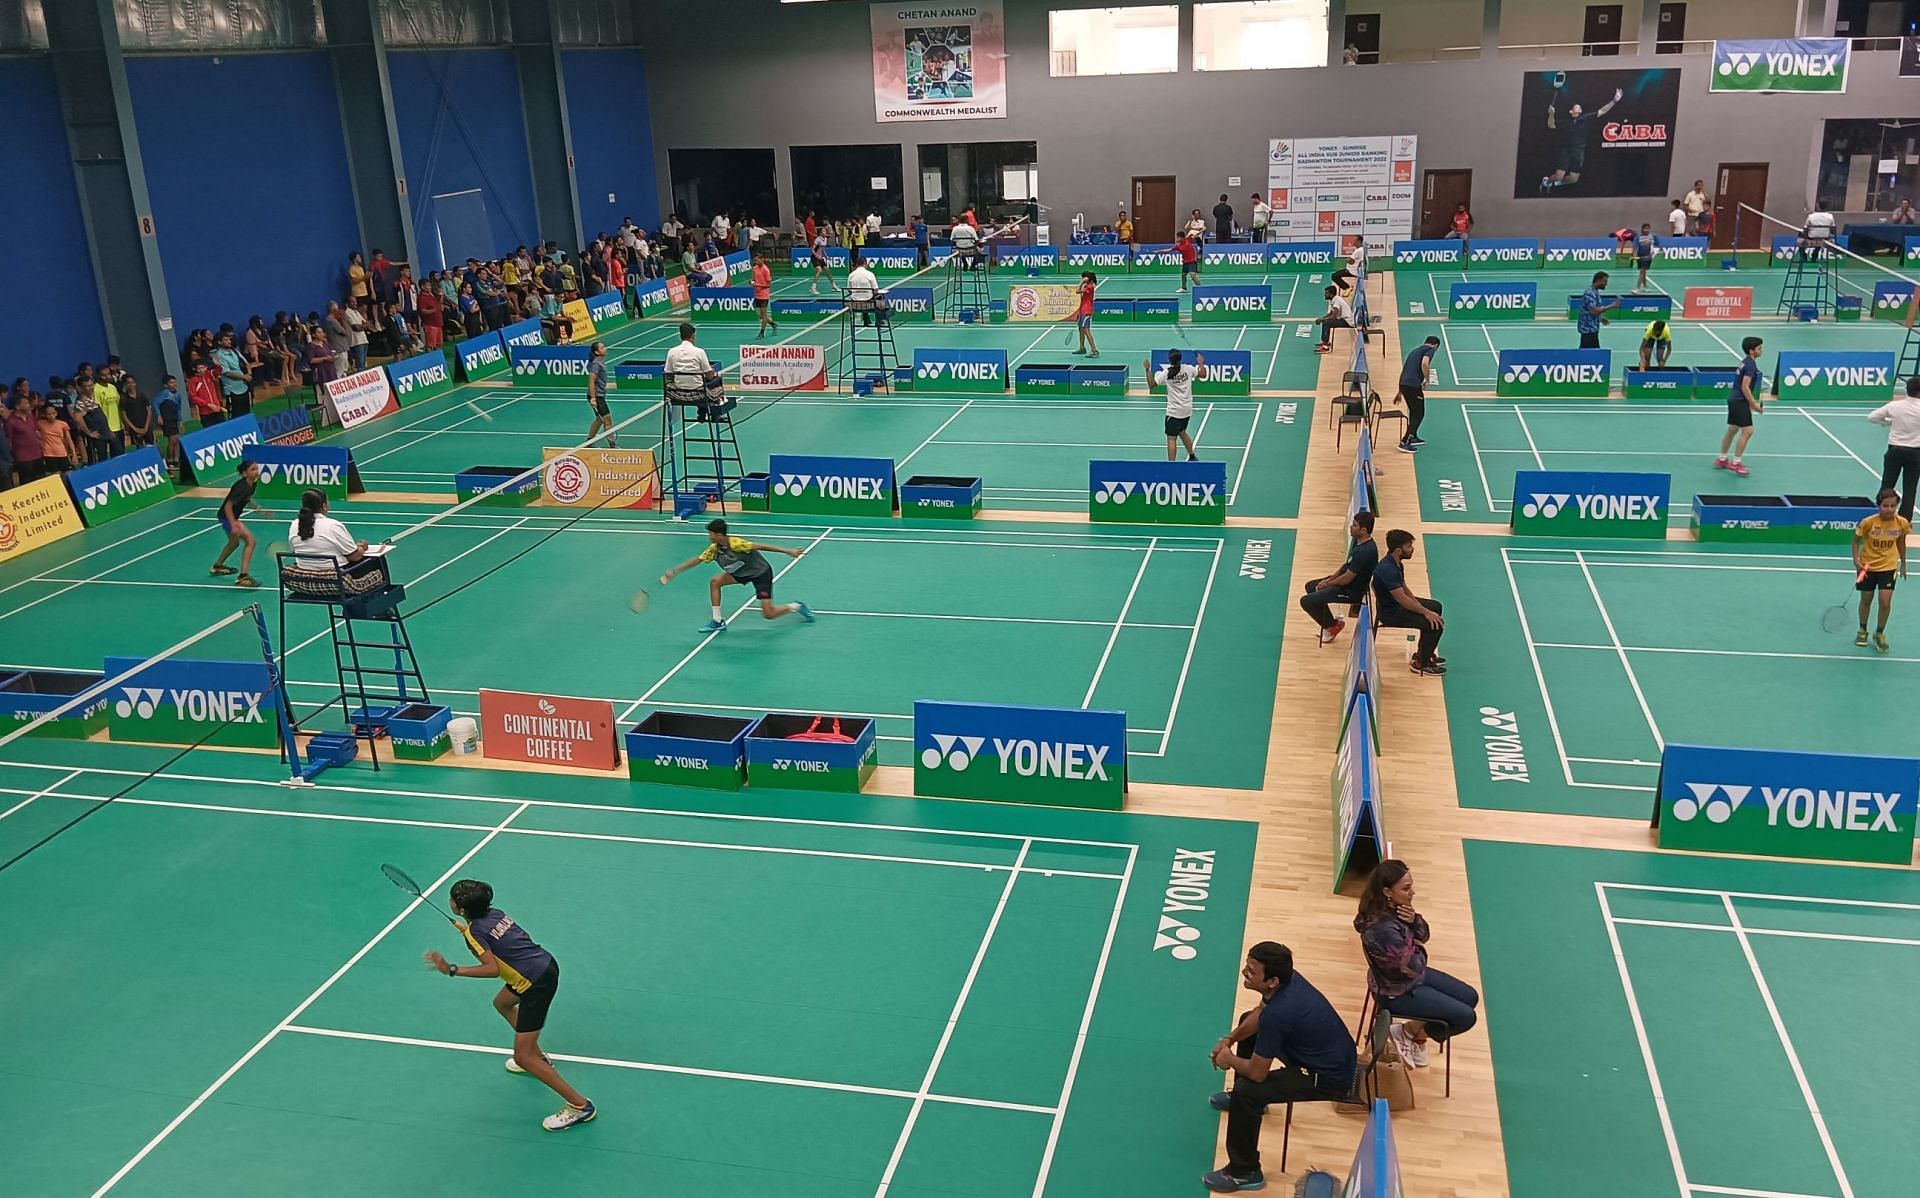 All India Sub Junior Under-13 Ranking Badminton tournament was held at the Chetan Anand Badminton Centre in Hyderabad from June 19 to 25. (Pic credit: BAI)